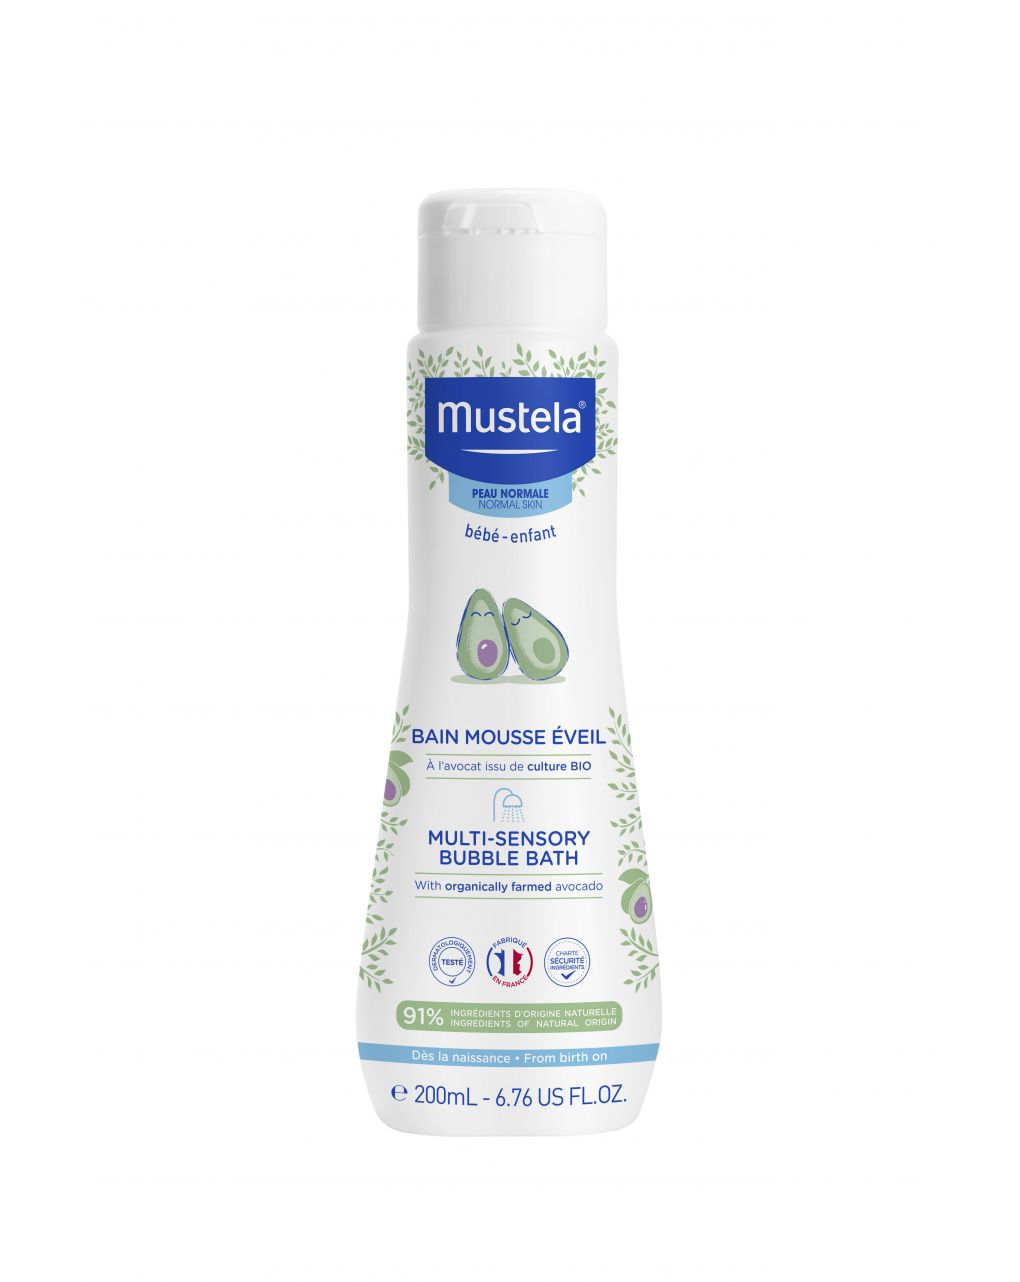 Bagnetto mille bolle 200ml - Mustela